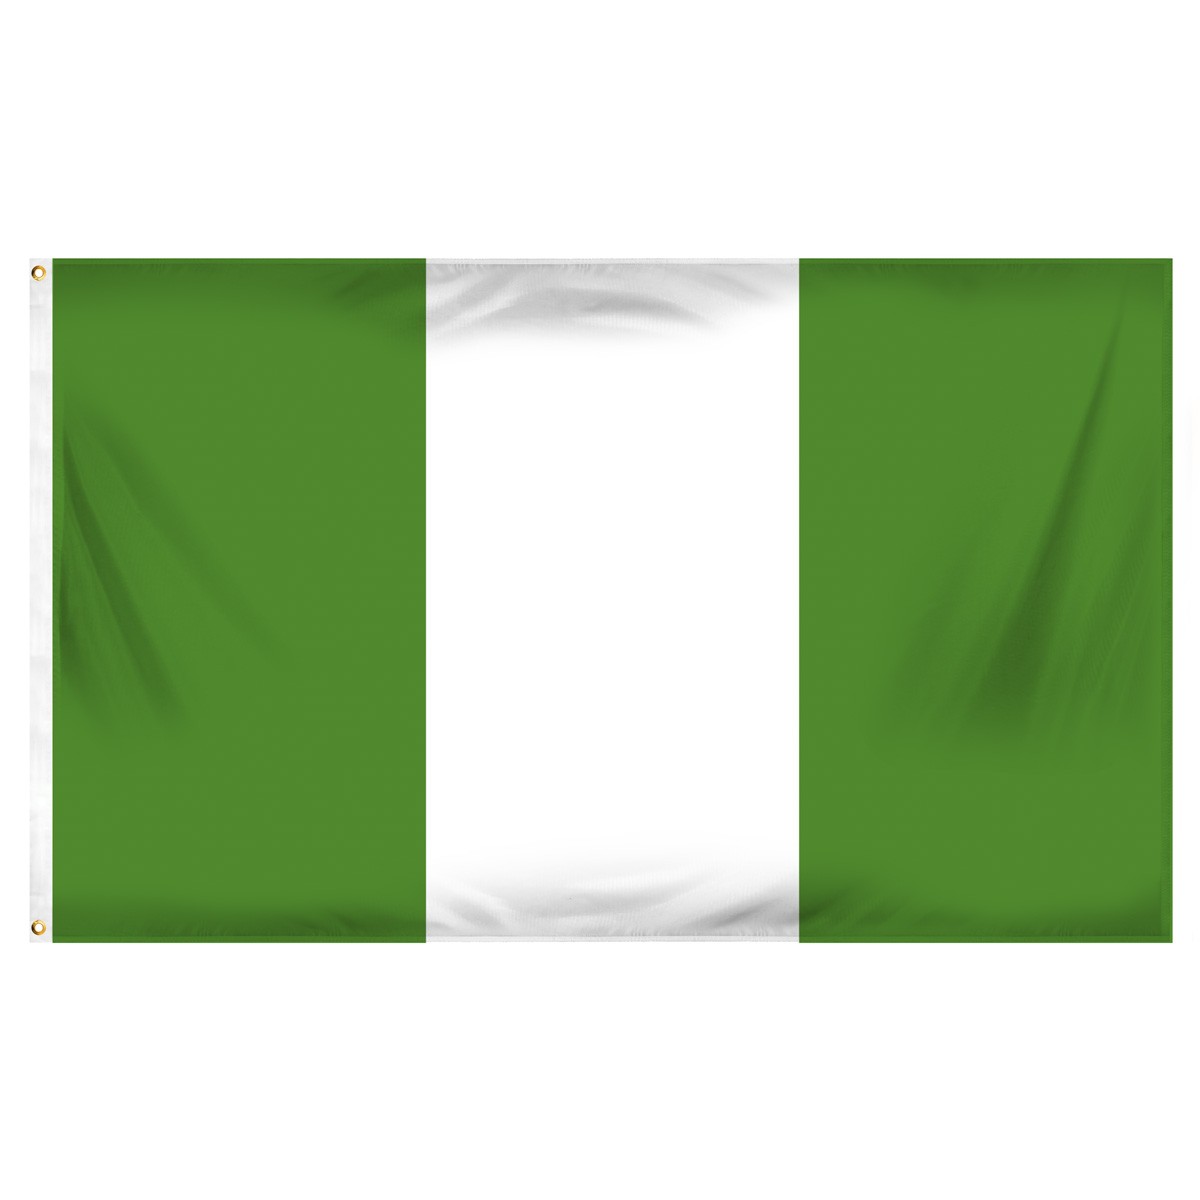 Nigeria Building Pennants and Flags